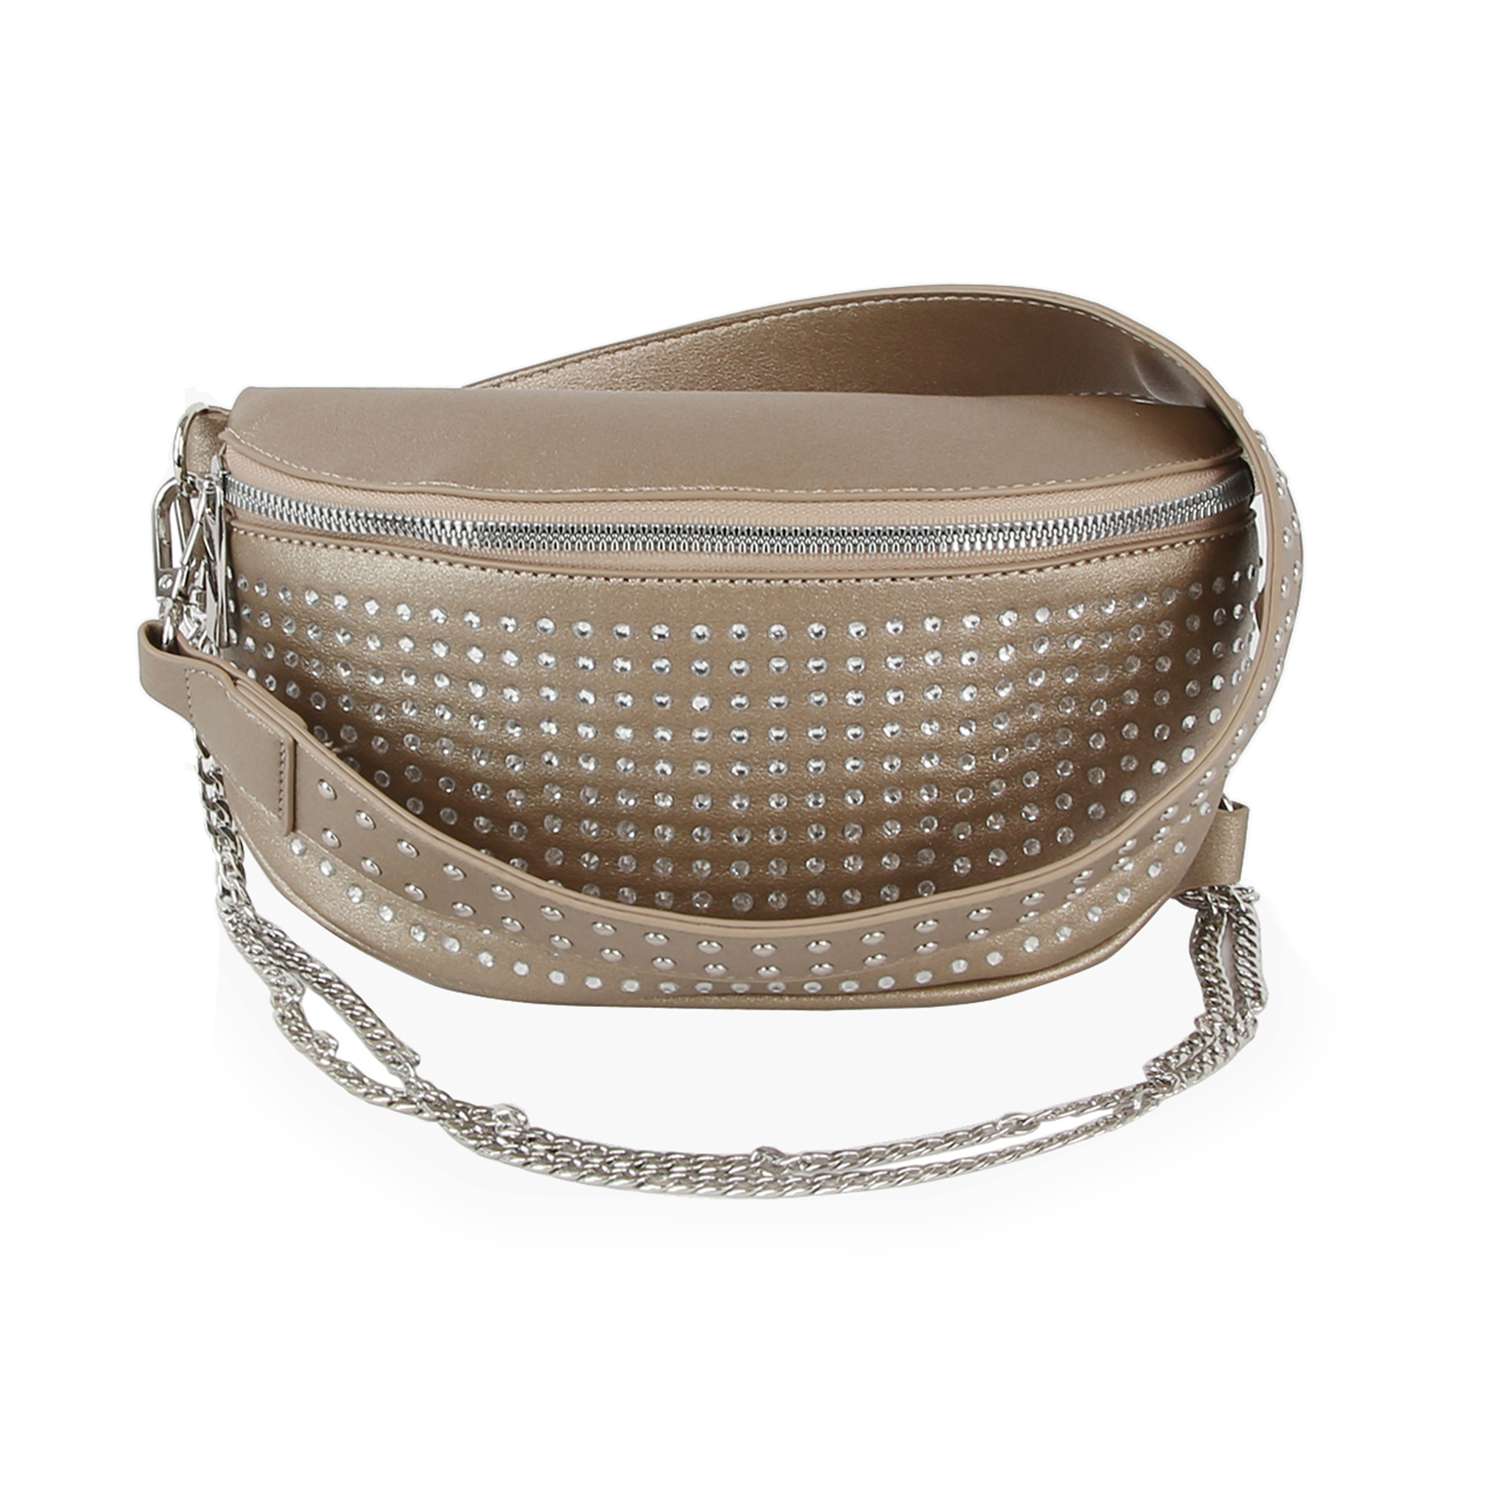 Stylish Studded Crossbody Bag: Pink - Coco and lulu boutique 